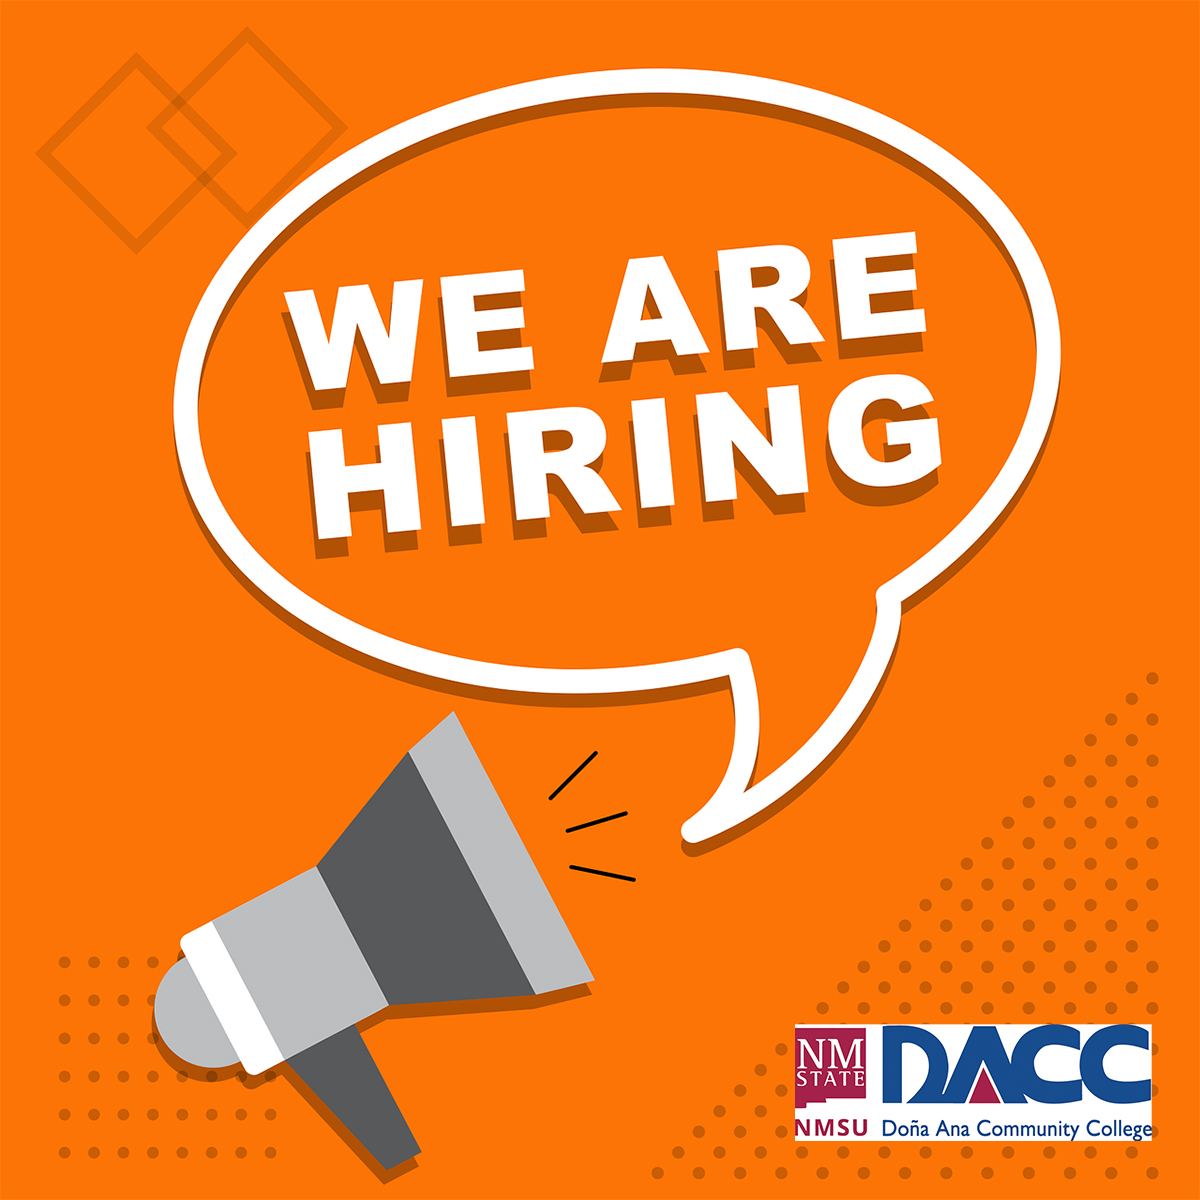 We have a lot of great positions open at DACC. Check it out and see what is available to you: zurl.co/MGNl #WeAreDACC